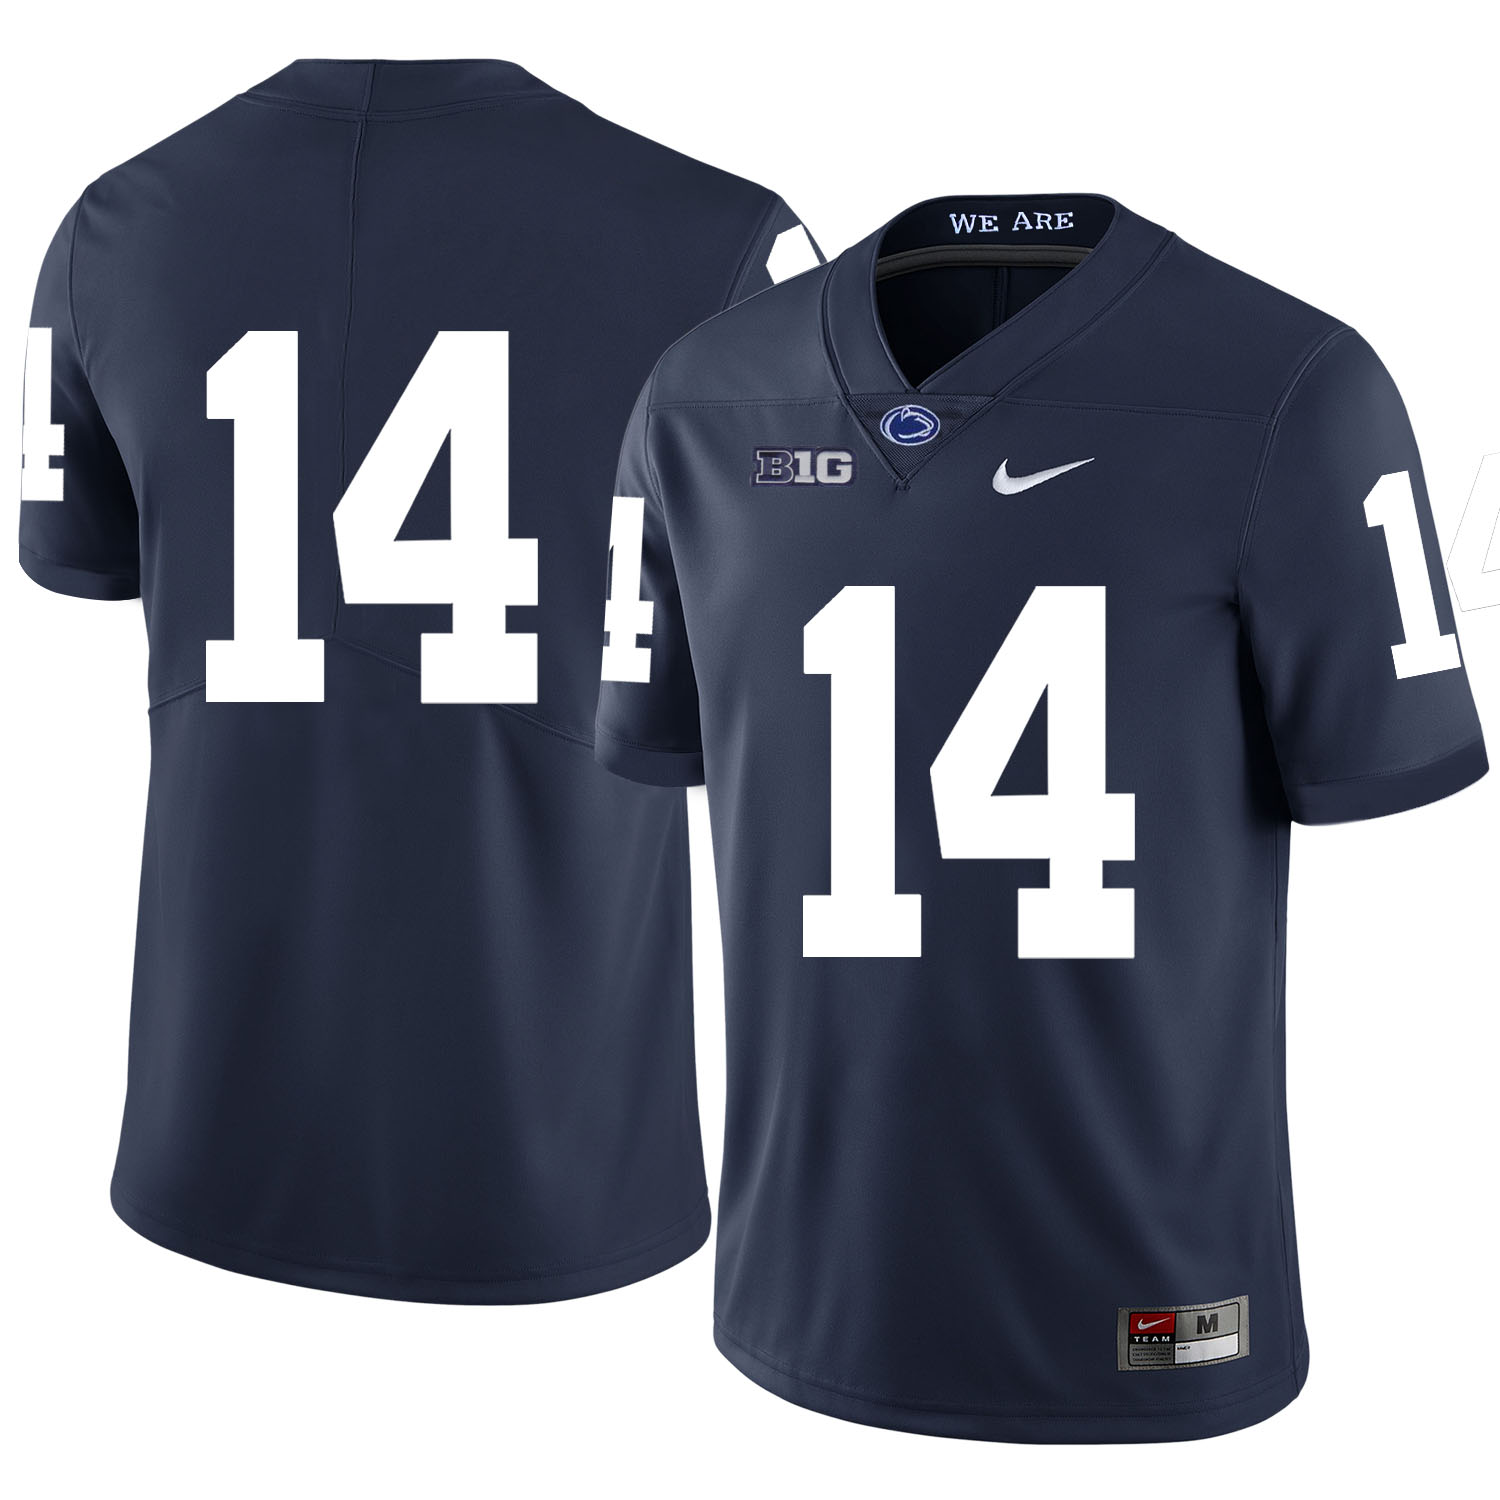 Penn State Nittany Lions 14 Christian Hackenberg Navy Nike College Football Jersey